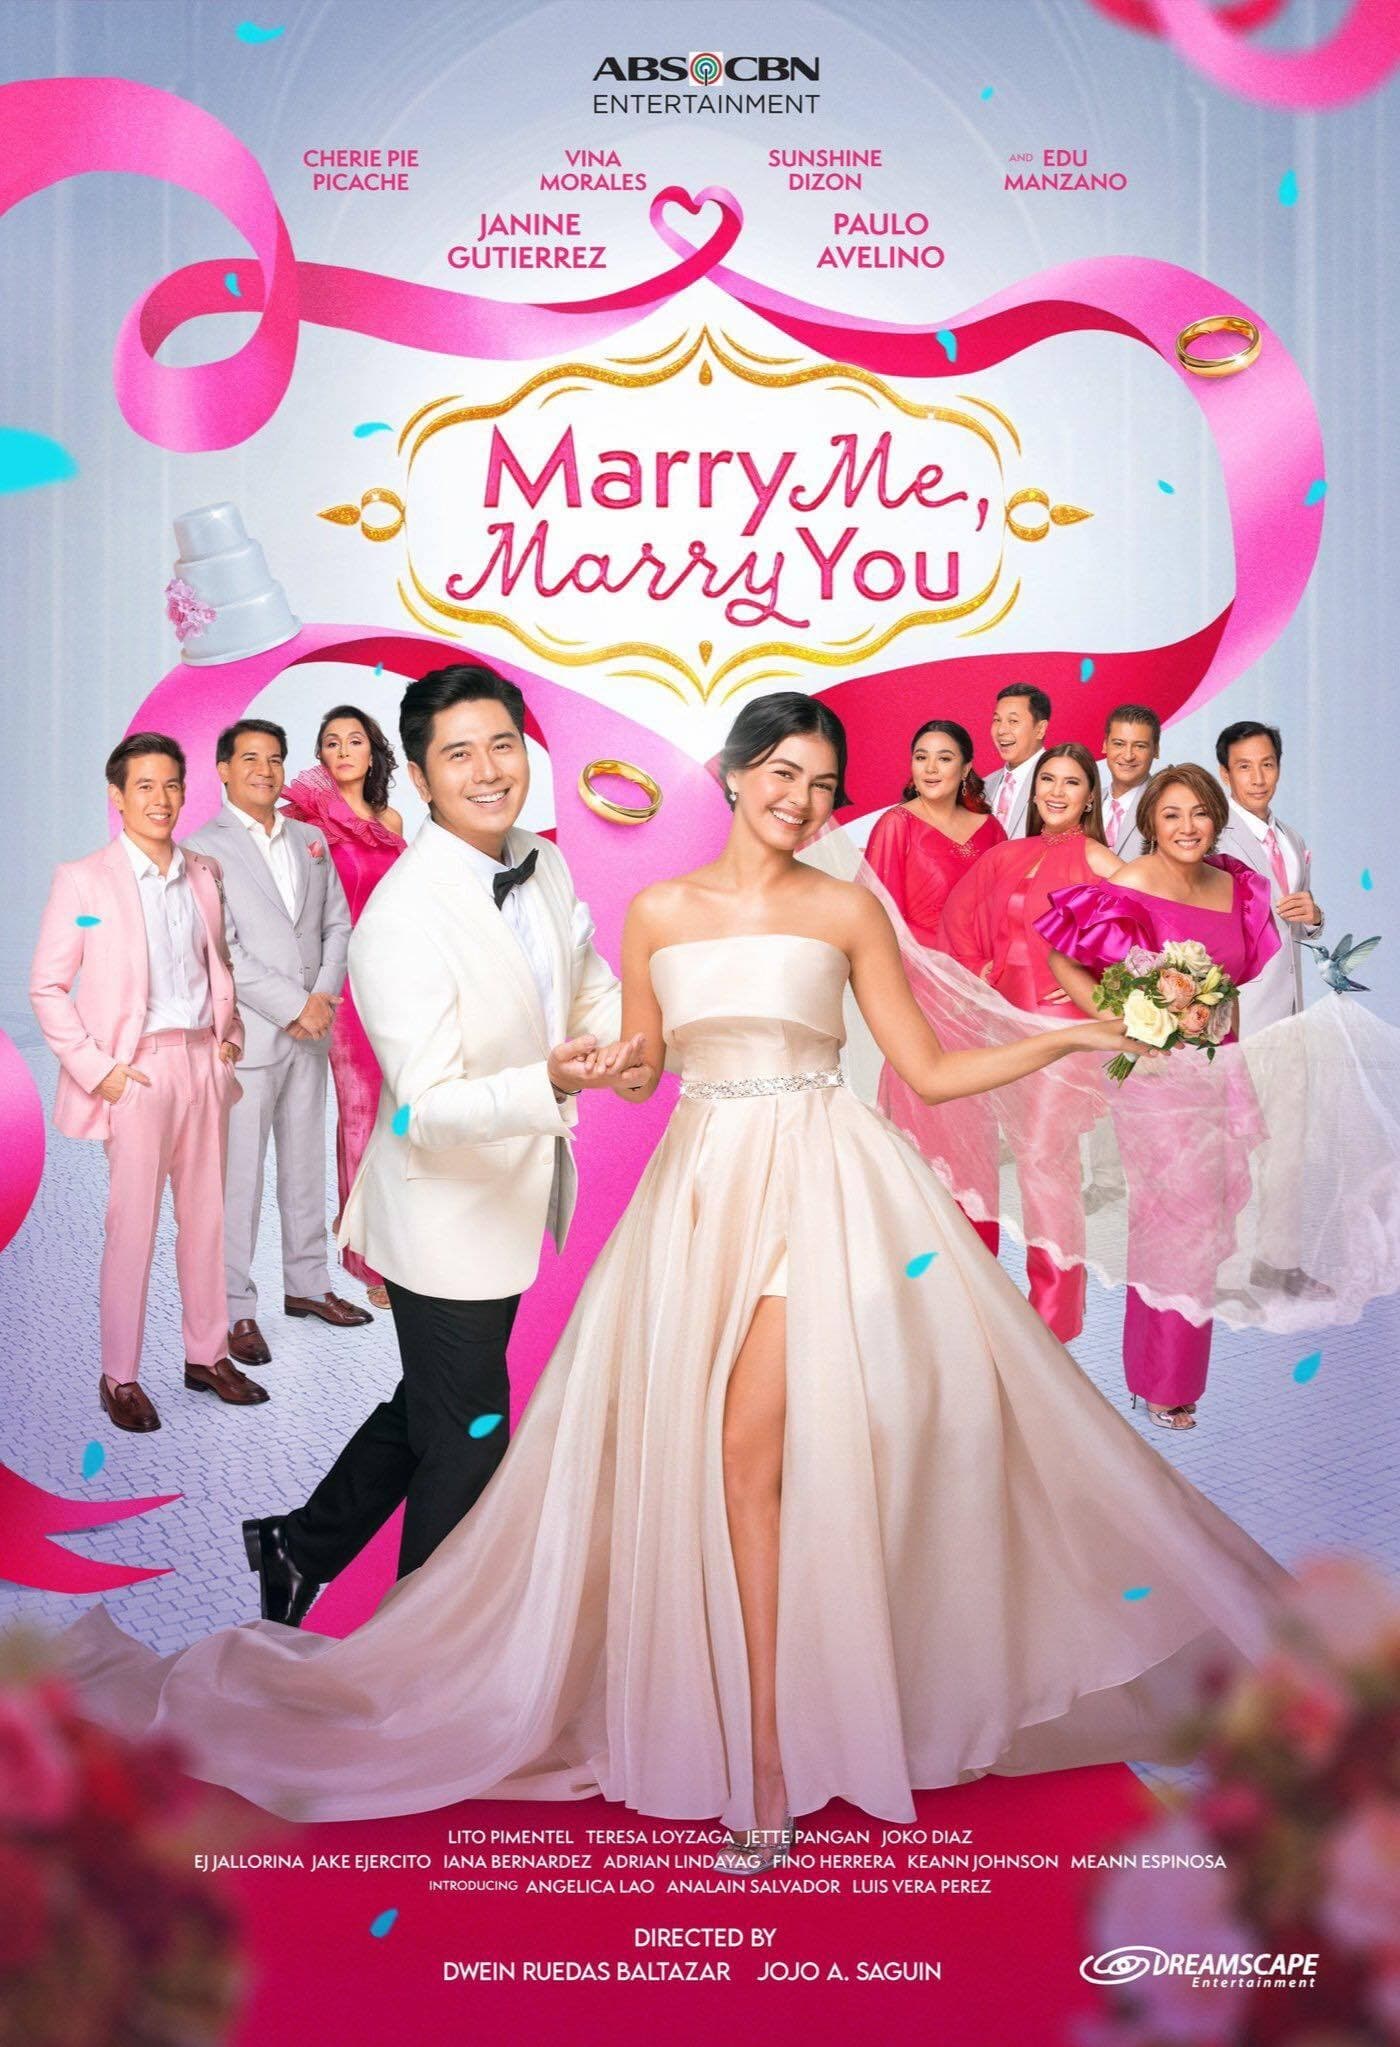 Marry Me, Marry You TV Shows About Love Triangle